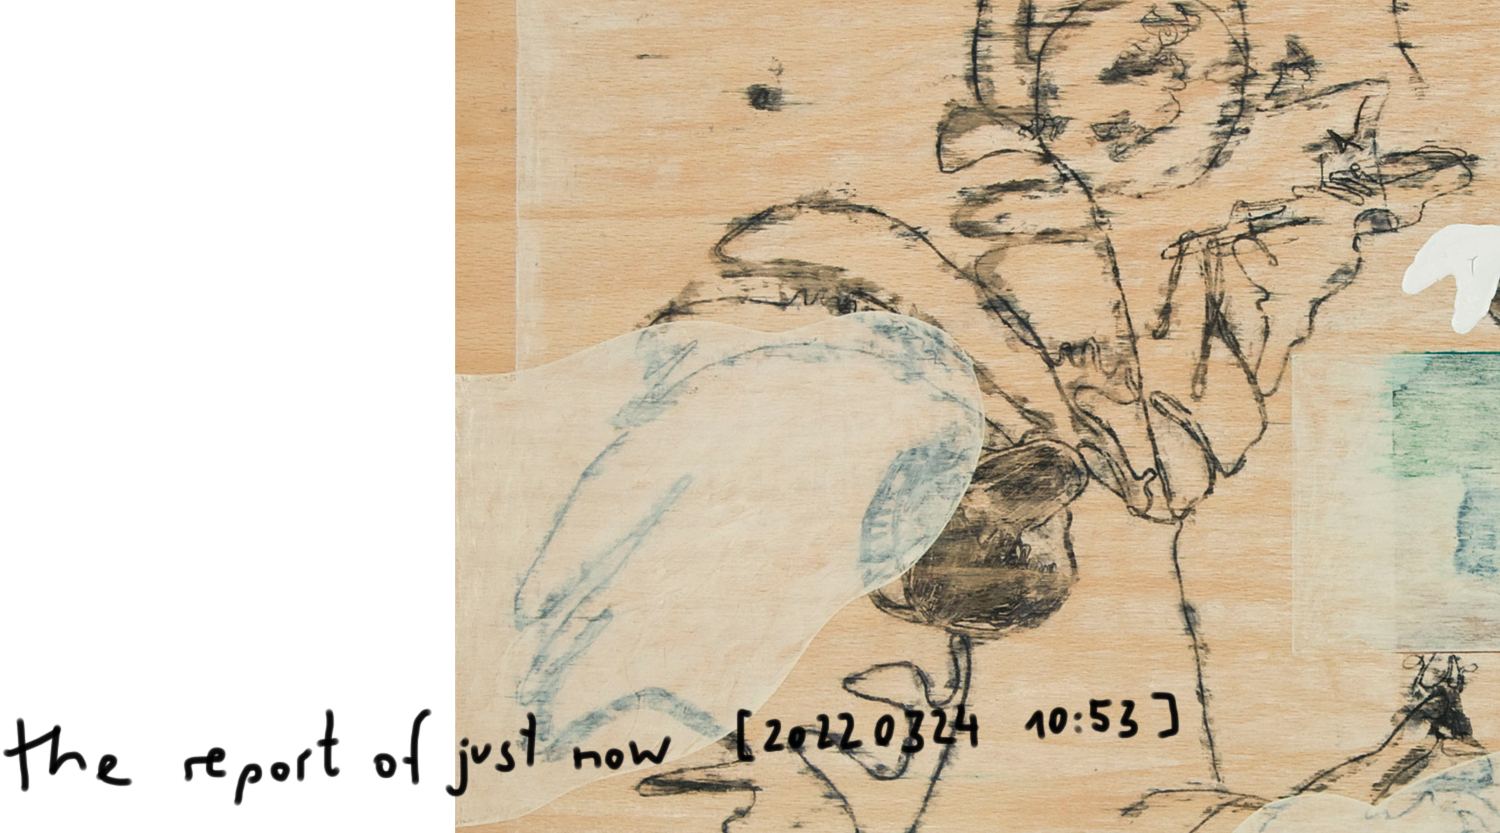 Exhibition: Wolfgang Kschwendt - The report of just now - May 2022